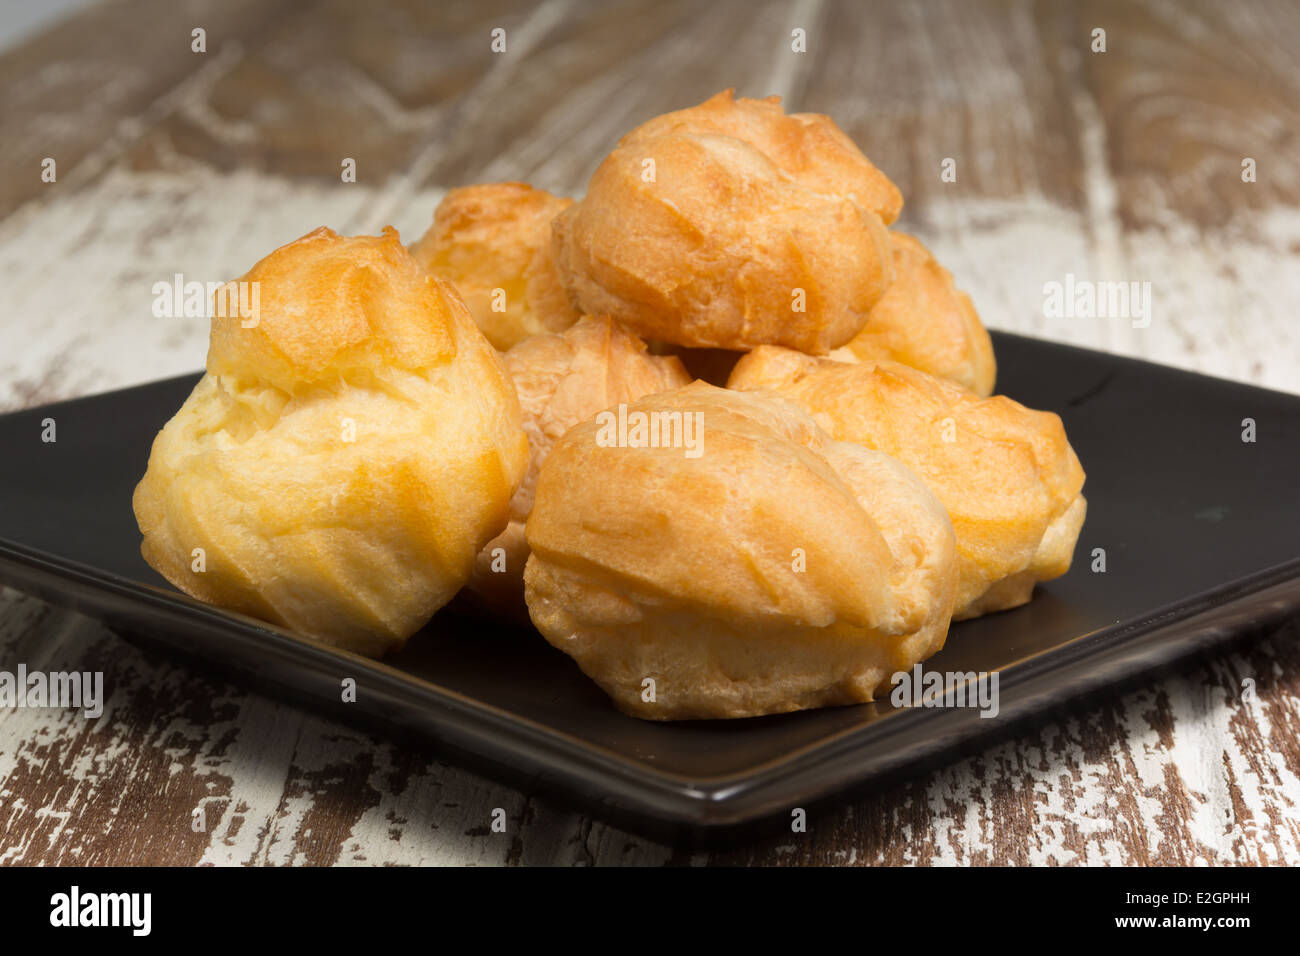 eclair on black ceramic plate on wood background Stock Photo